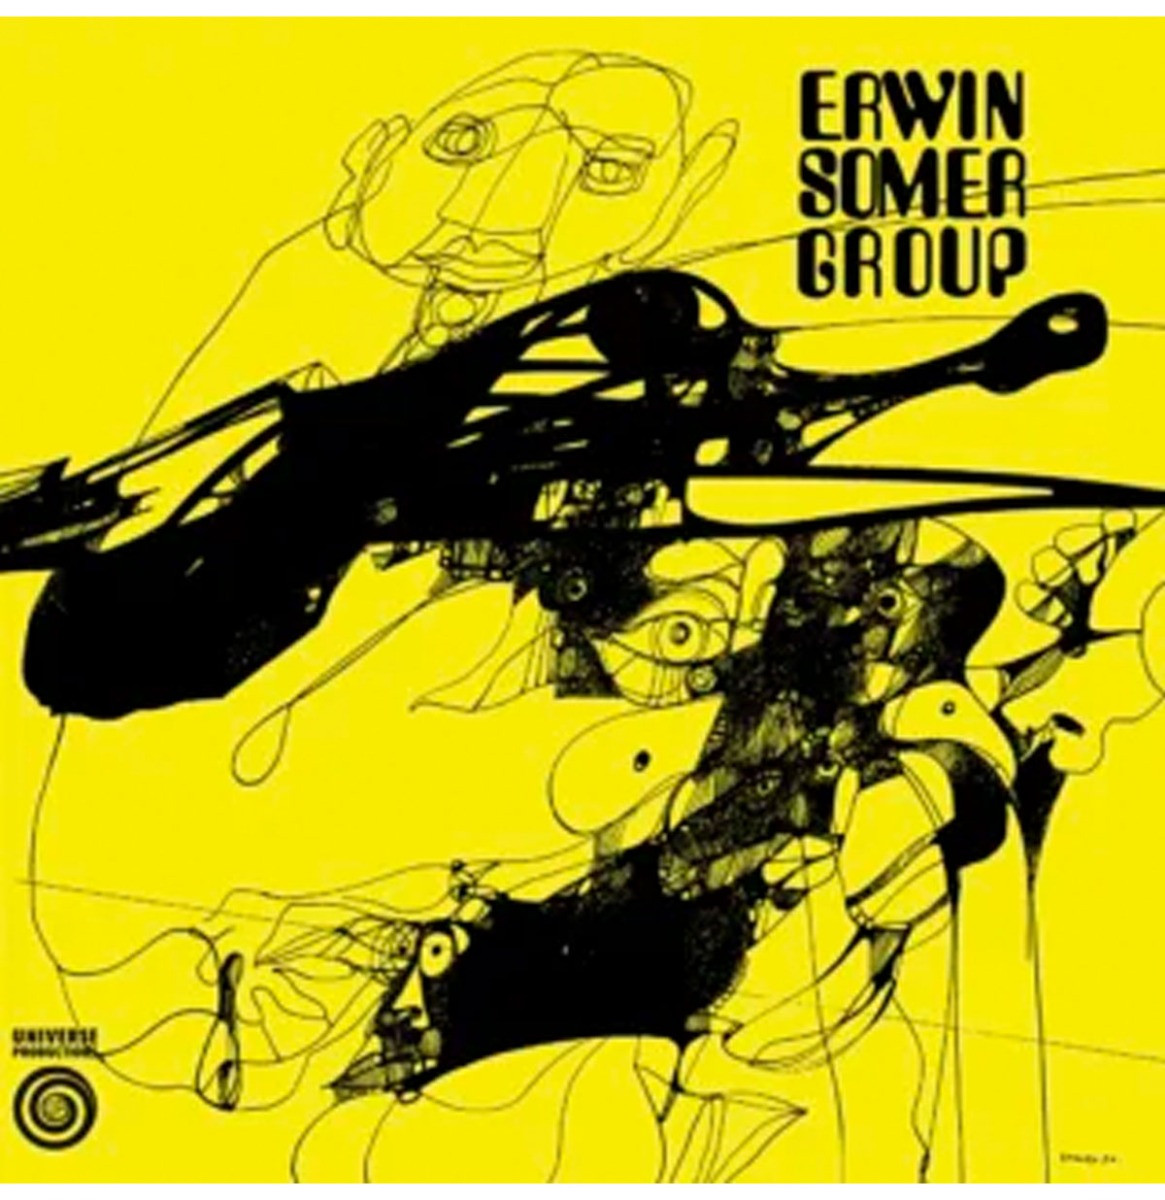 Erwin Somer Group - Erwin Somer Group (Record Store Day Black Friday 2022) LP